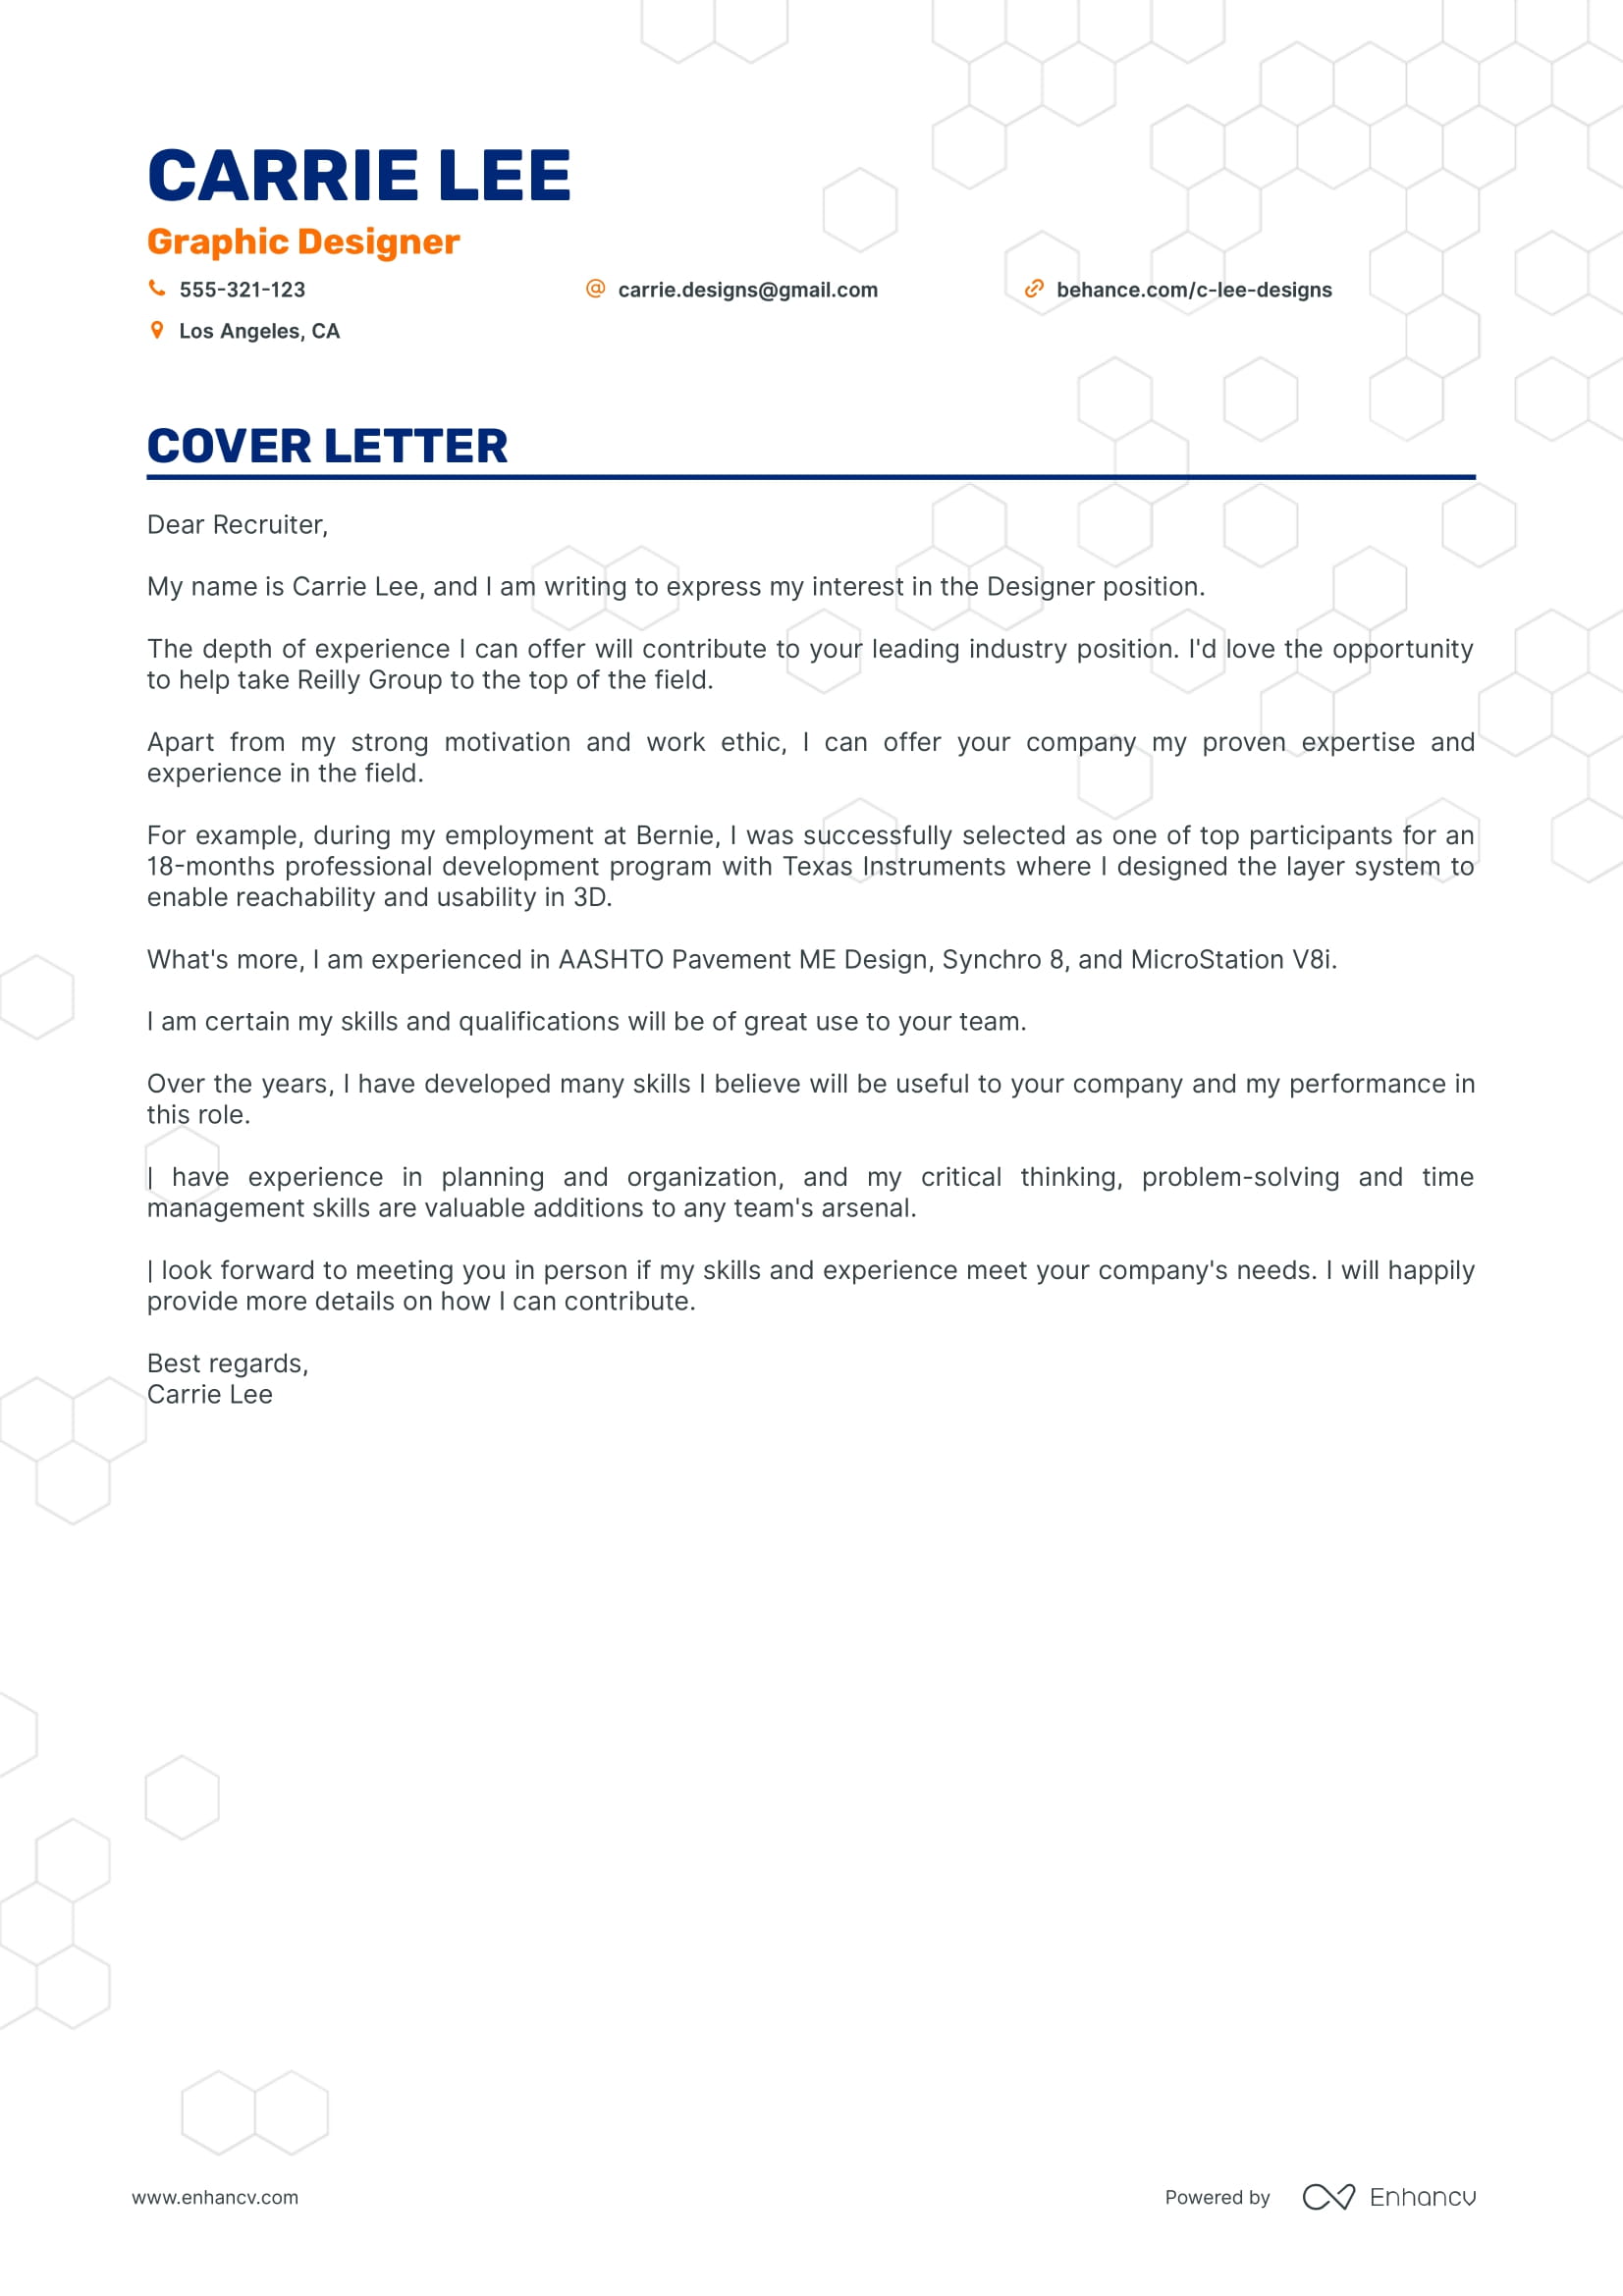 Carrie Lee Designer Cover Letter Example